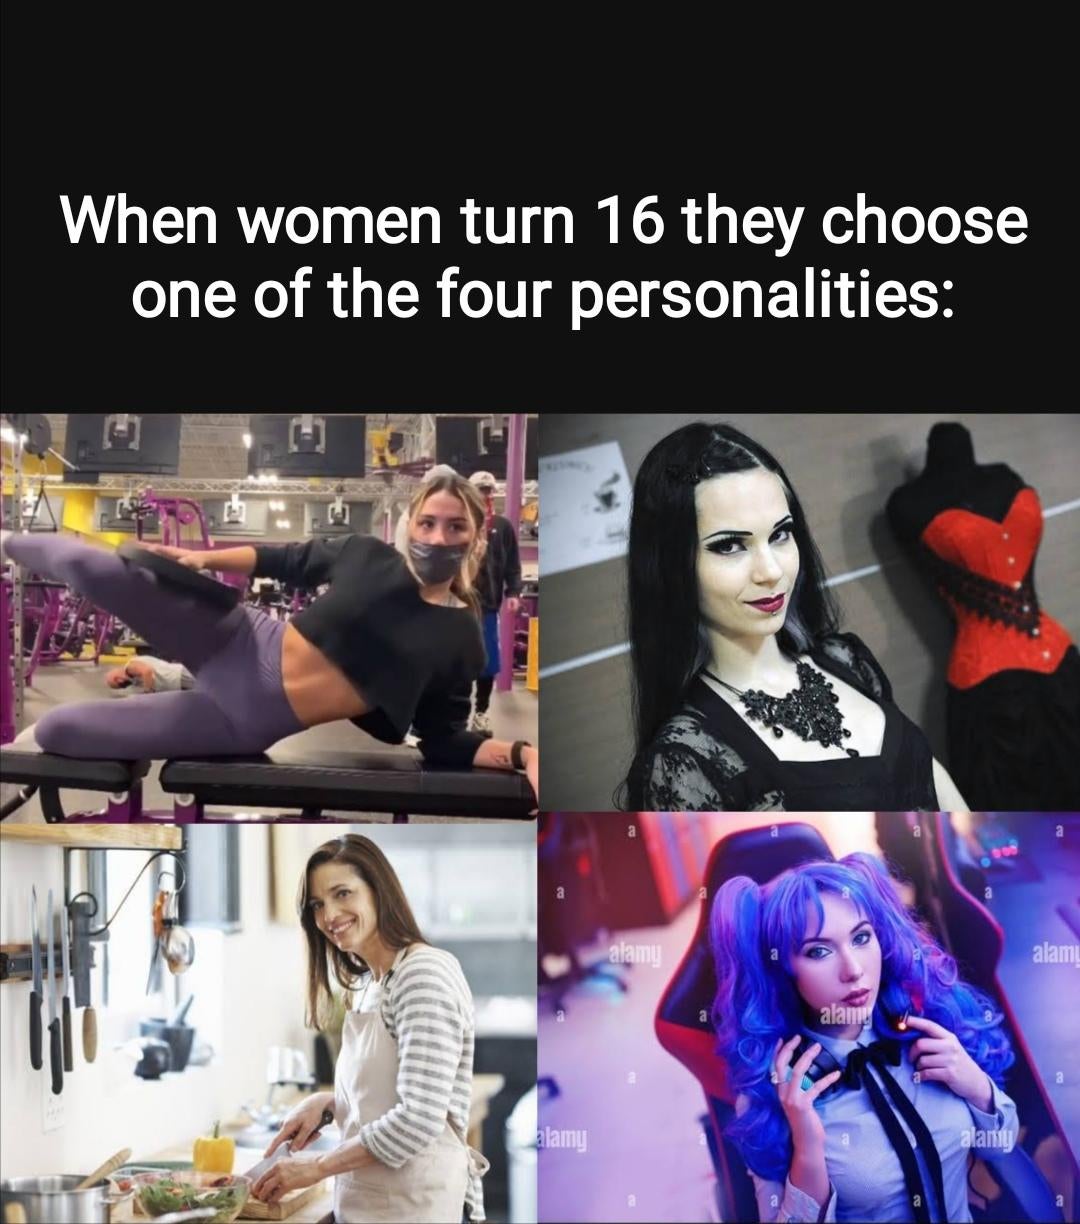 funny and dank memes  - collage - When women turn 16 they choose one of the four personalities alamy alam alamy Alamy alam